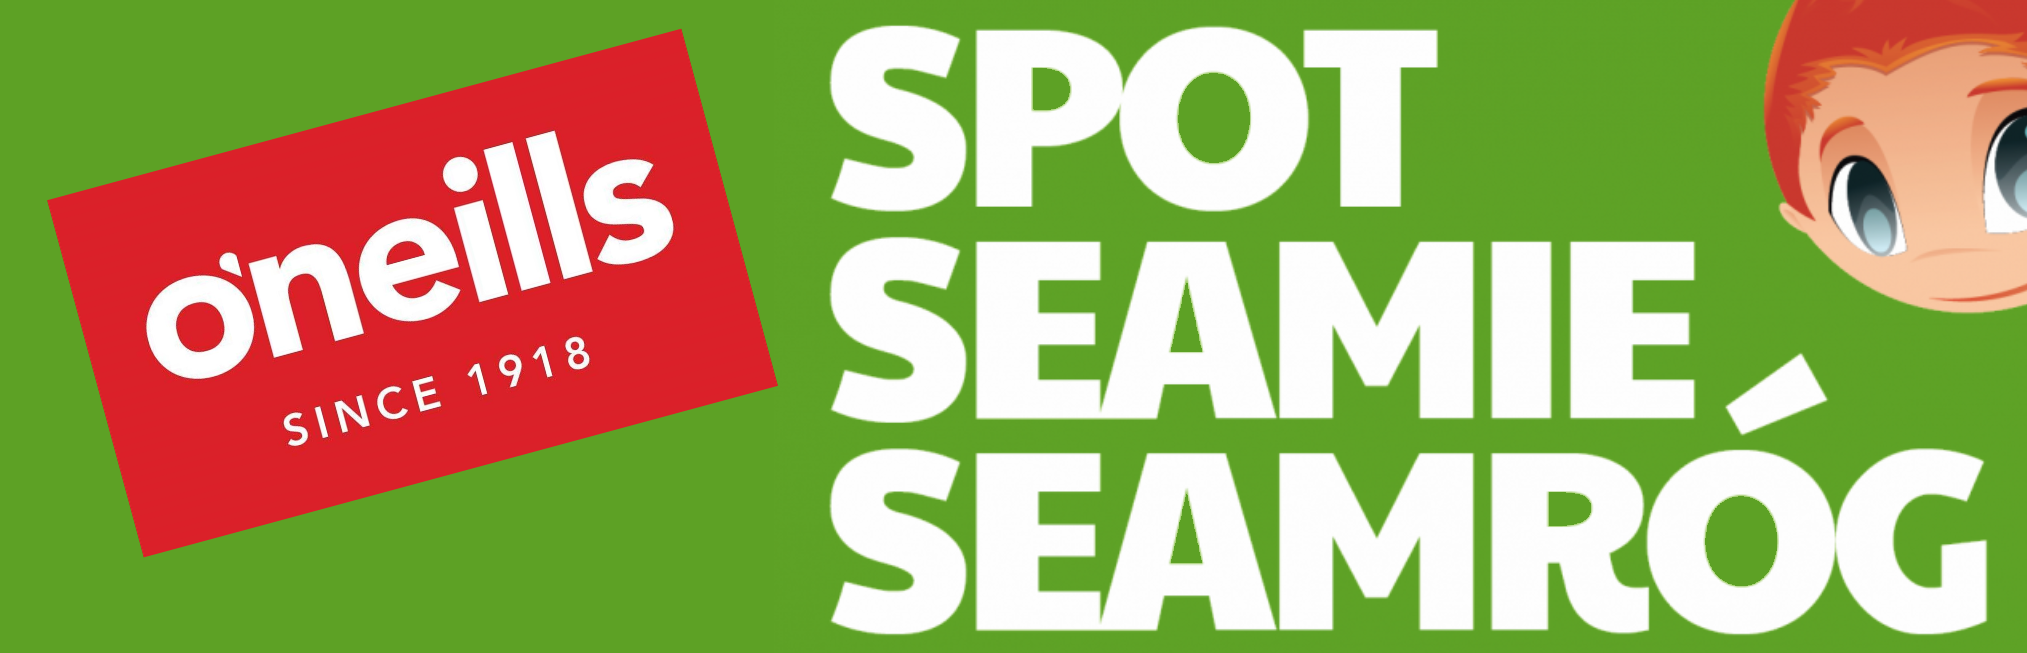 Spot Seamie this November in Issue 126